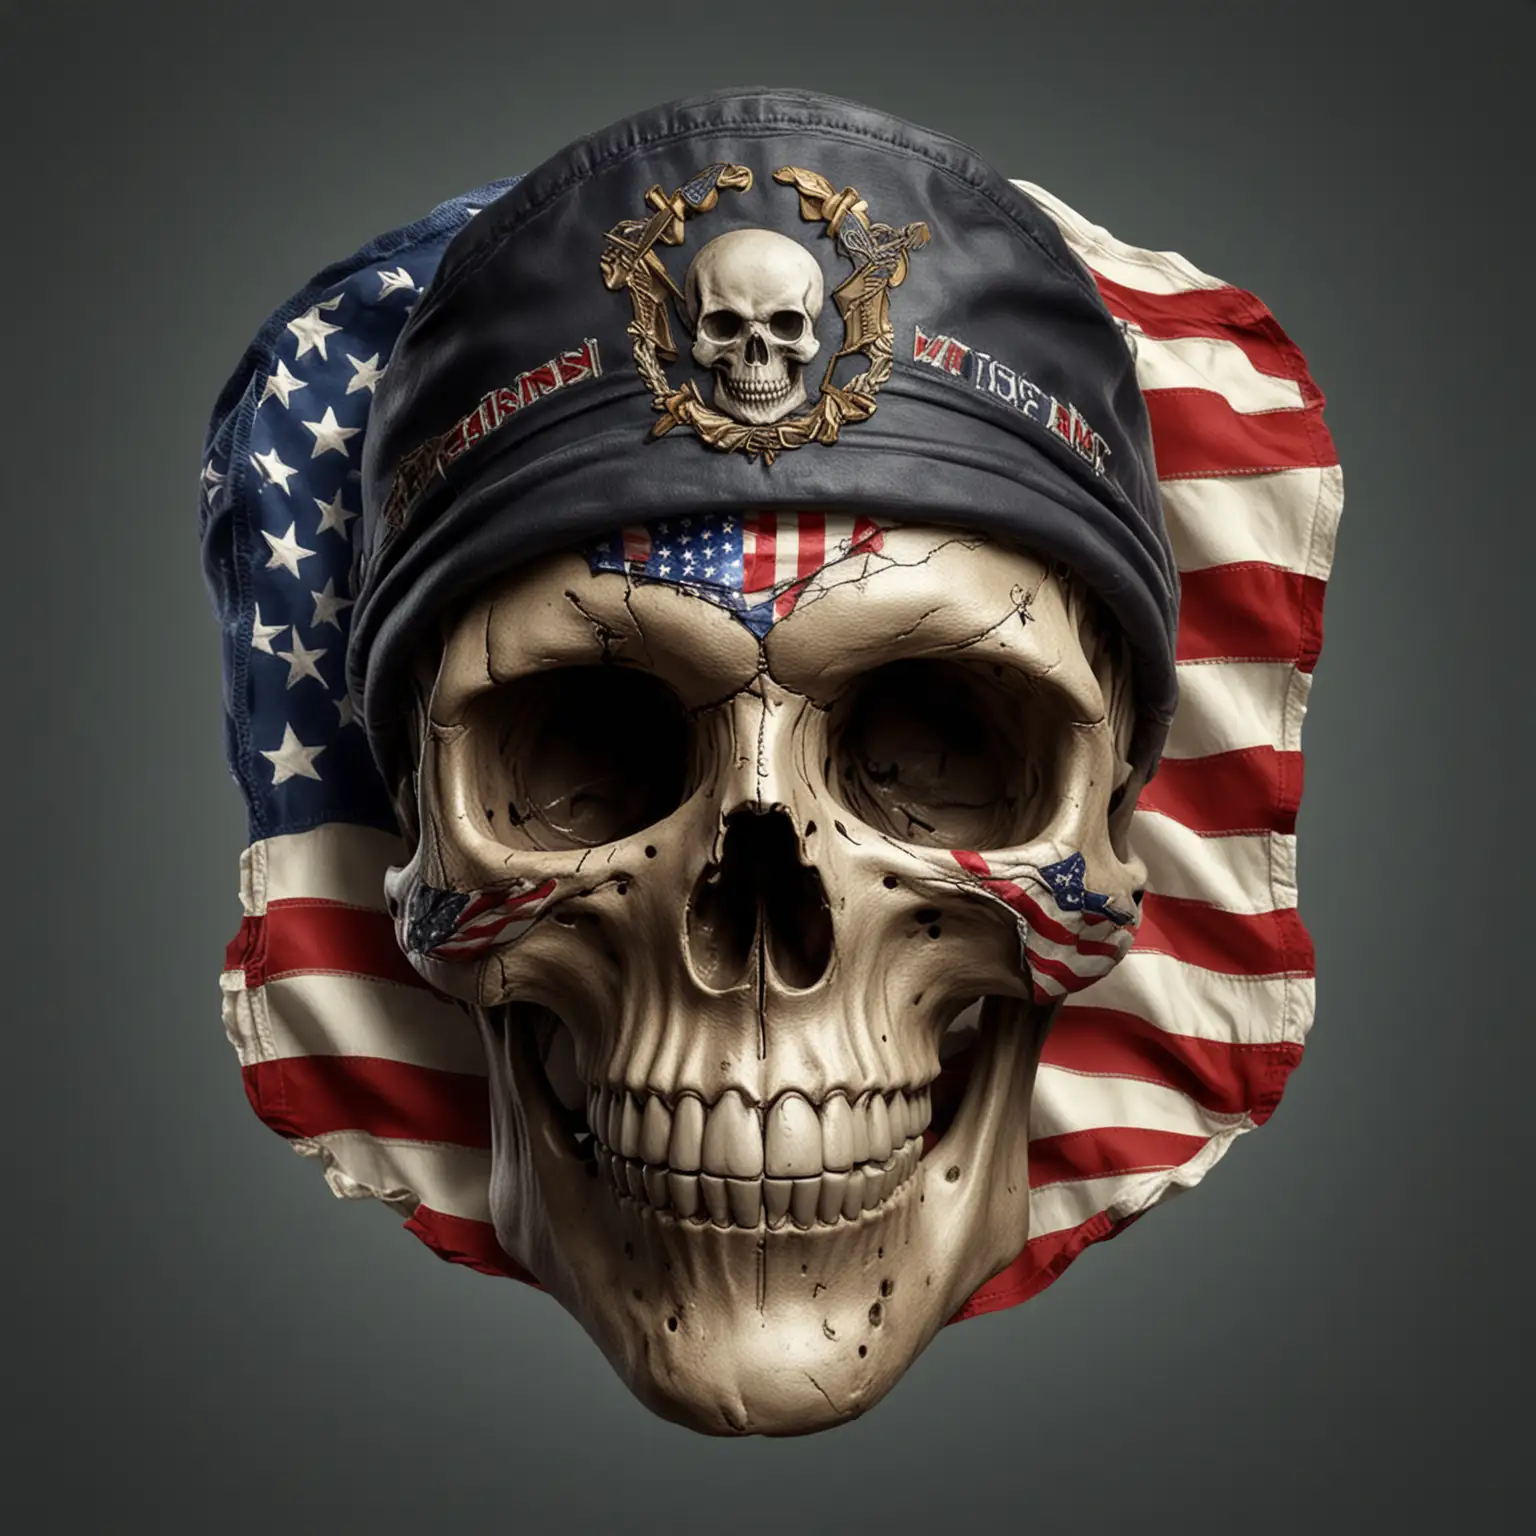 Veterans Day Skull Patriotic Tribute in Red White and Blue